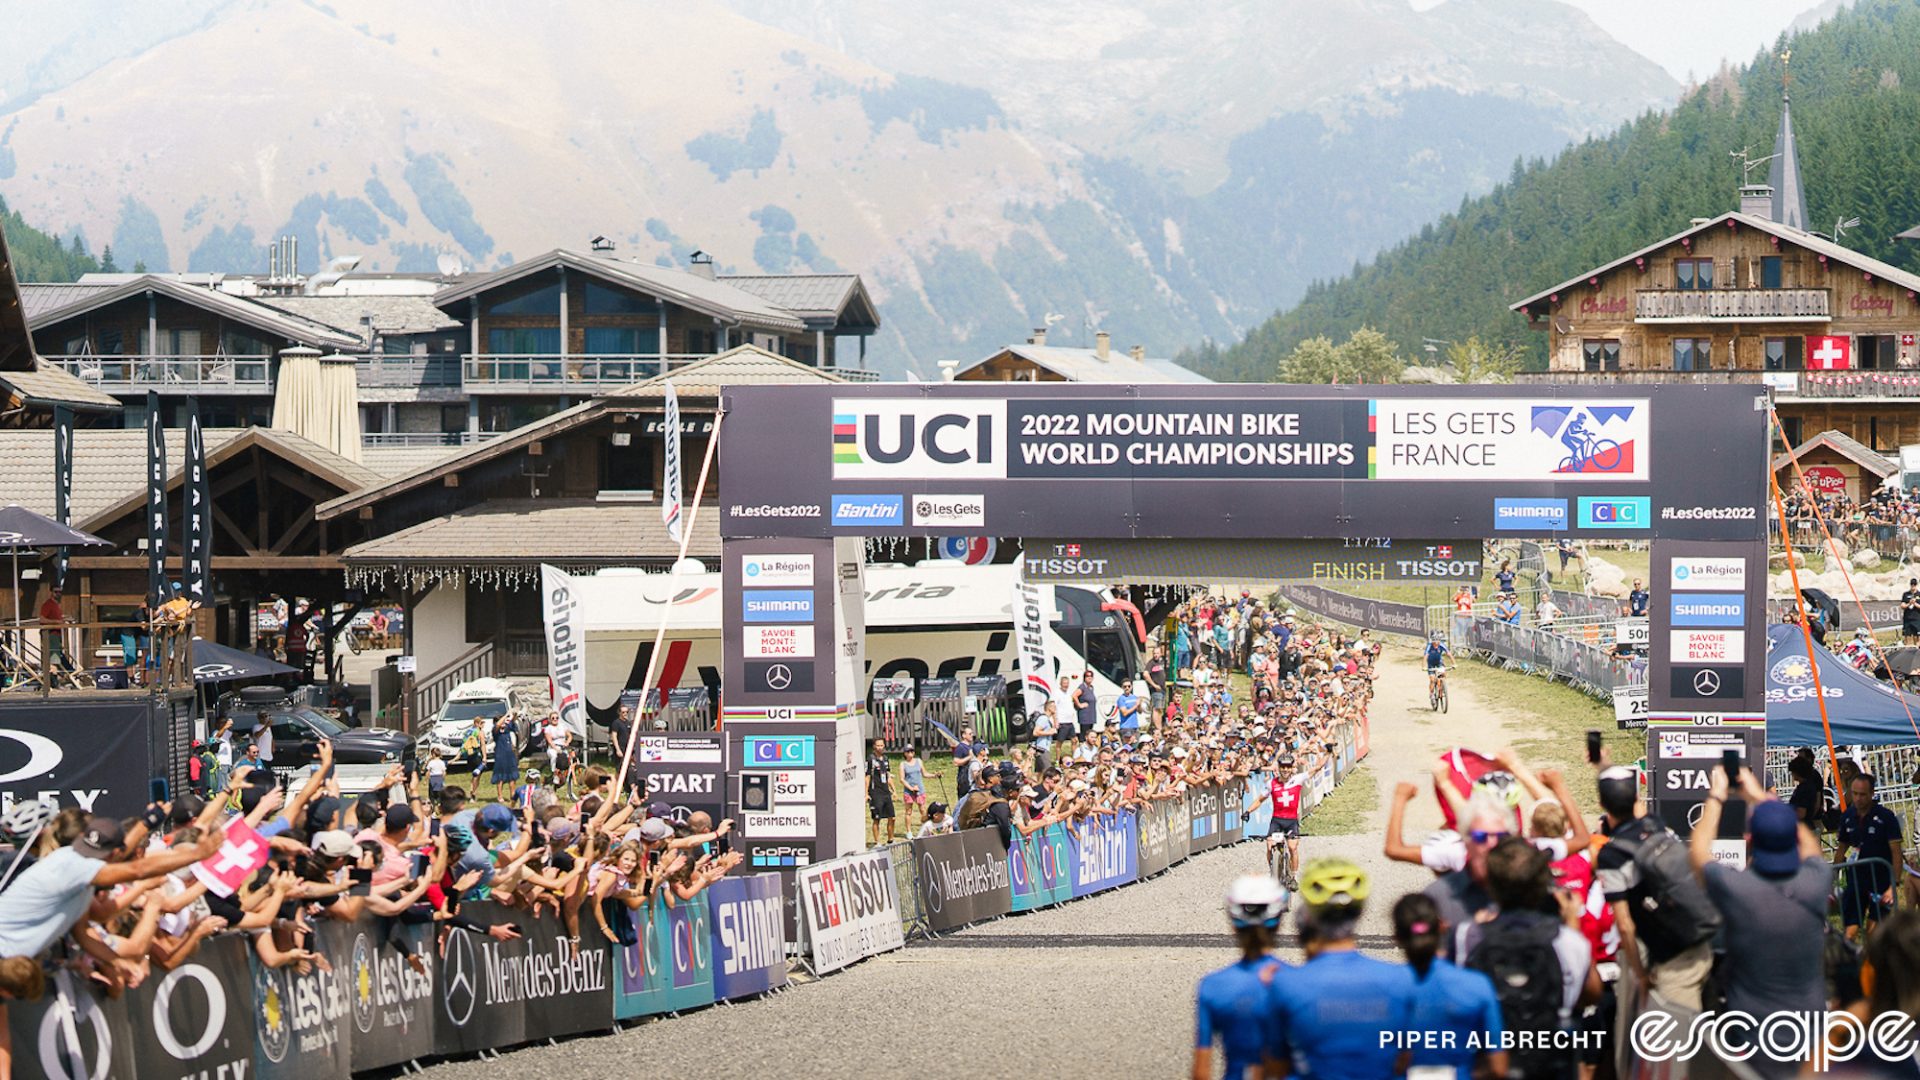 The finish line of the men's elite XC at the 2022 World MTB Championships in Les Gets, France, where Nino Schurter won his 10th title. Photo © Piper Albrecht